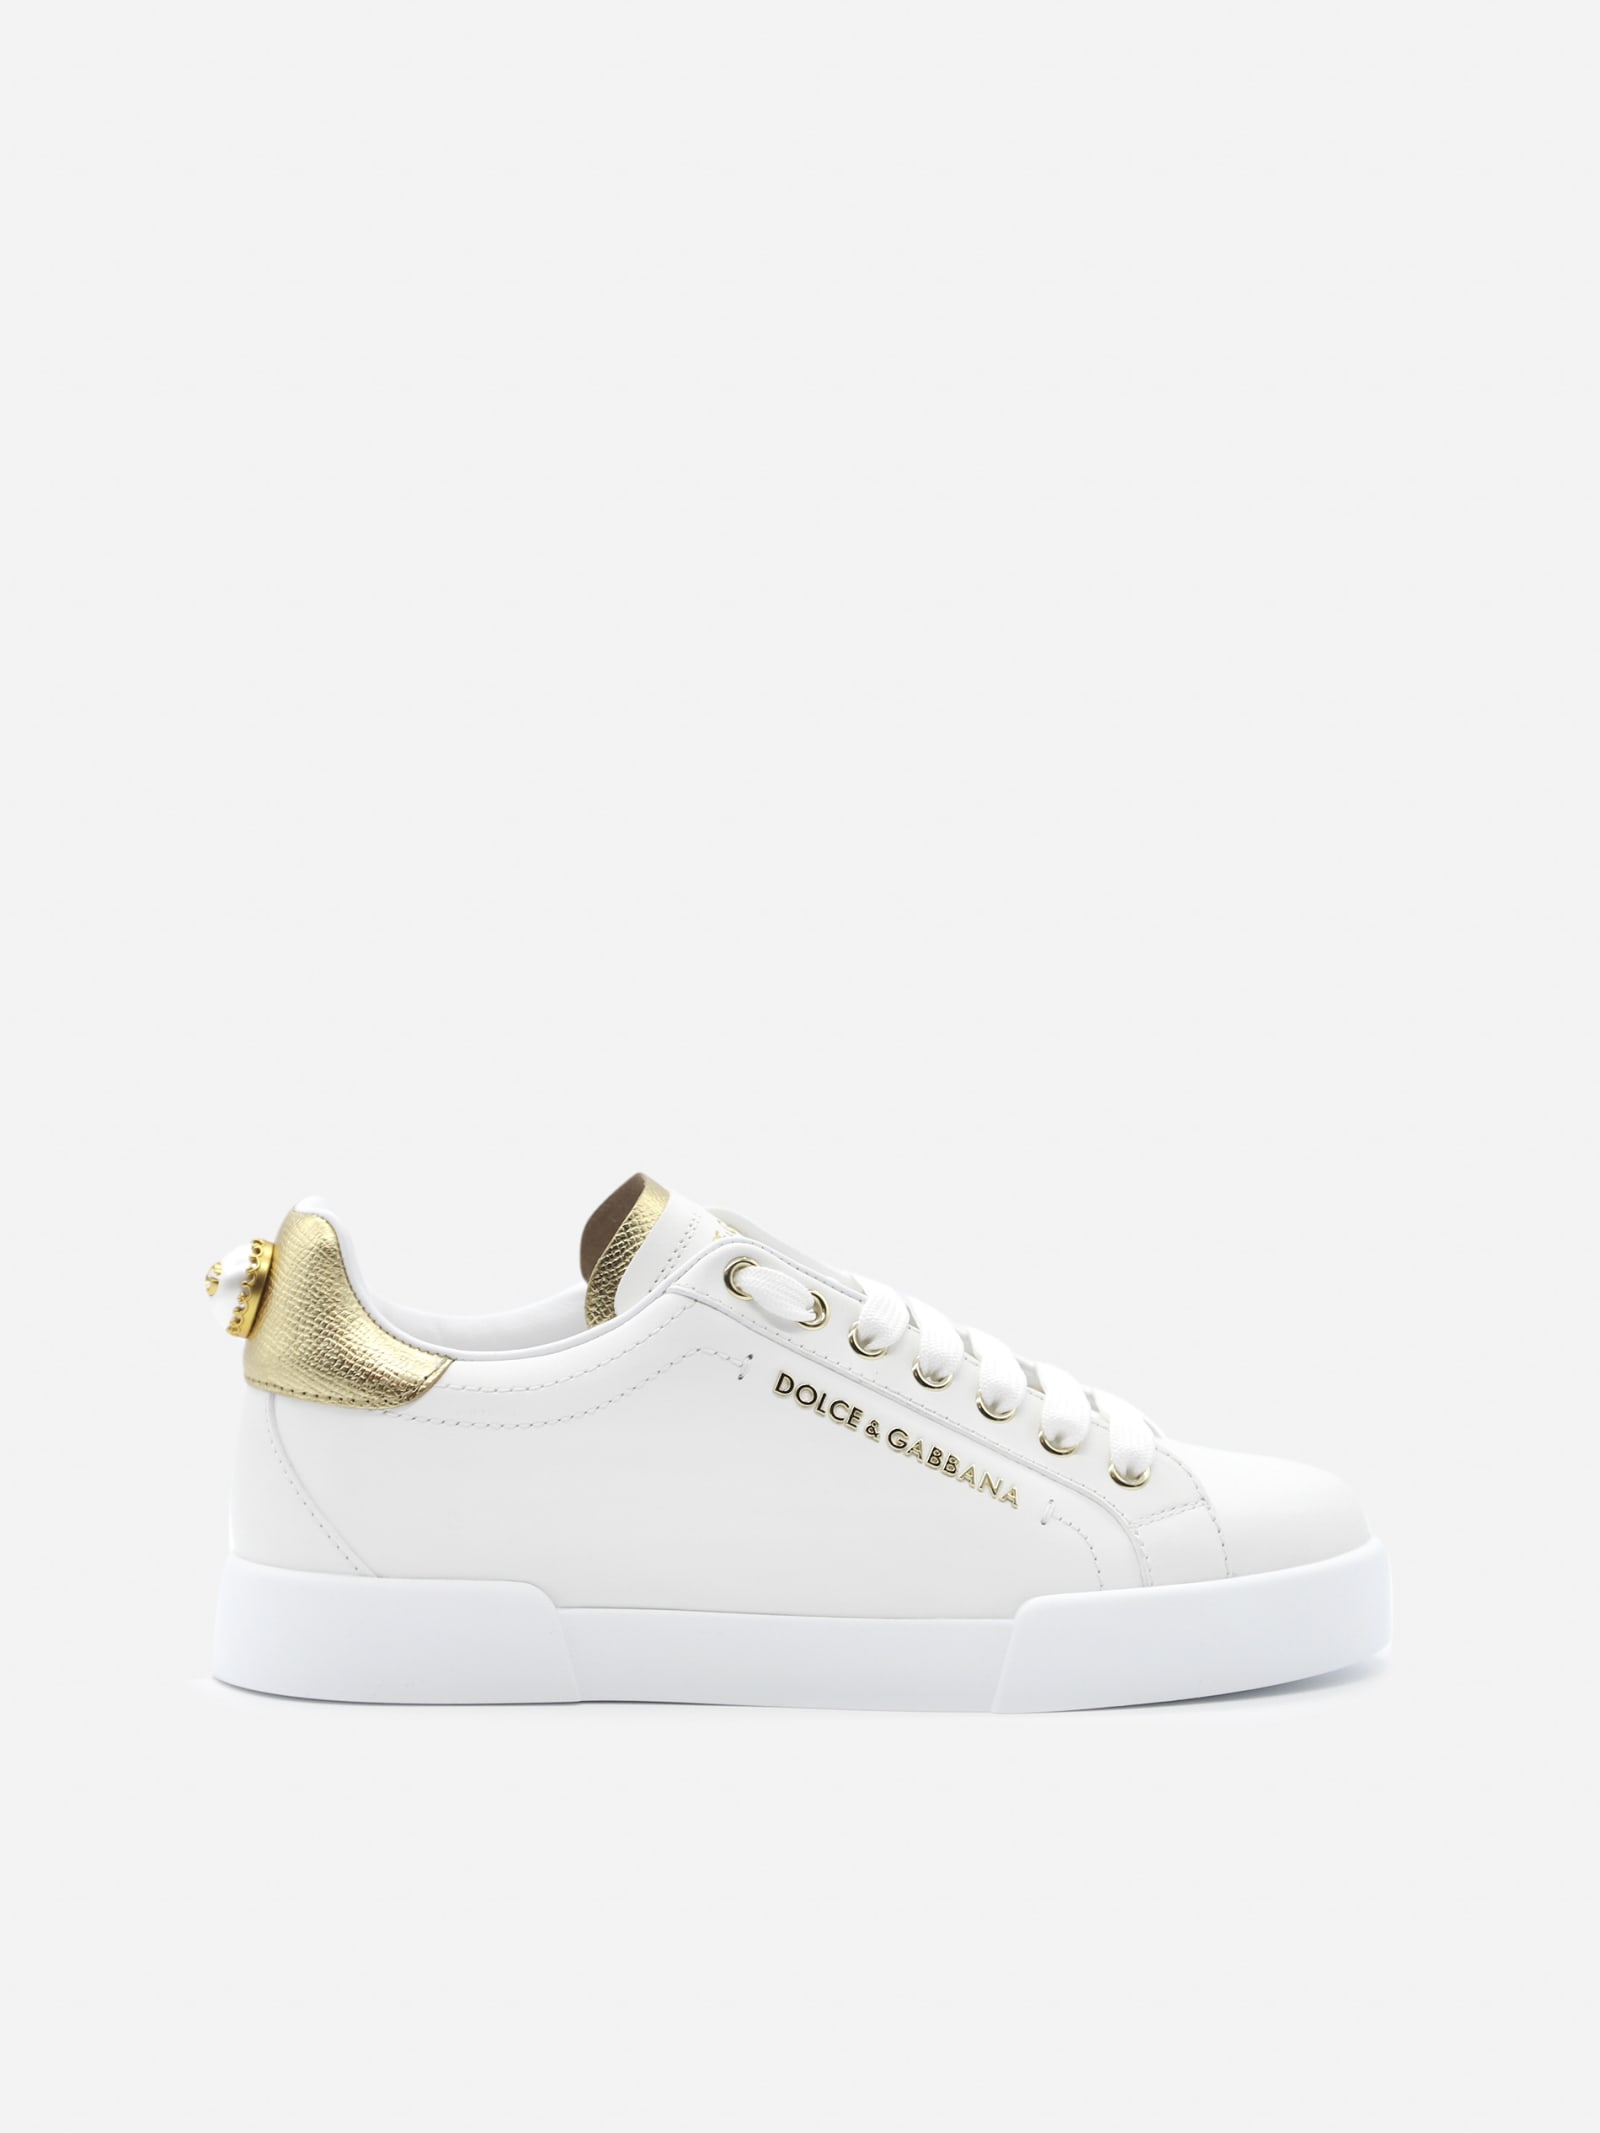 Buy Dolce & Gabbana Portofino Sneakers In Leather With Contrasting Inserts online, shop Dolce & Gabbana shoes with free shipping